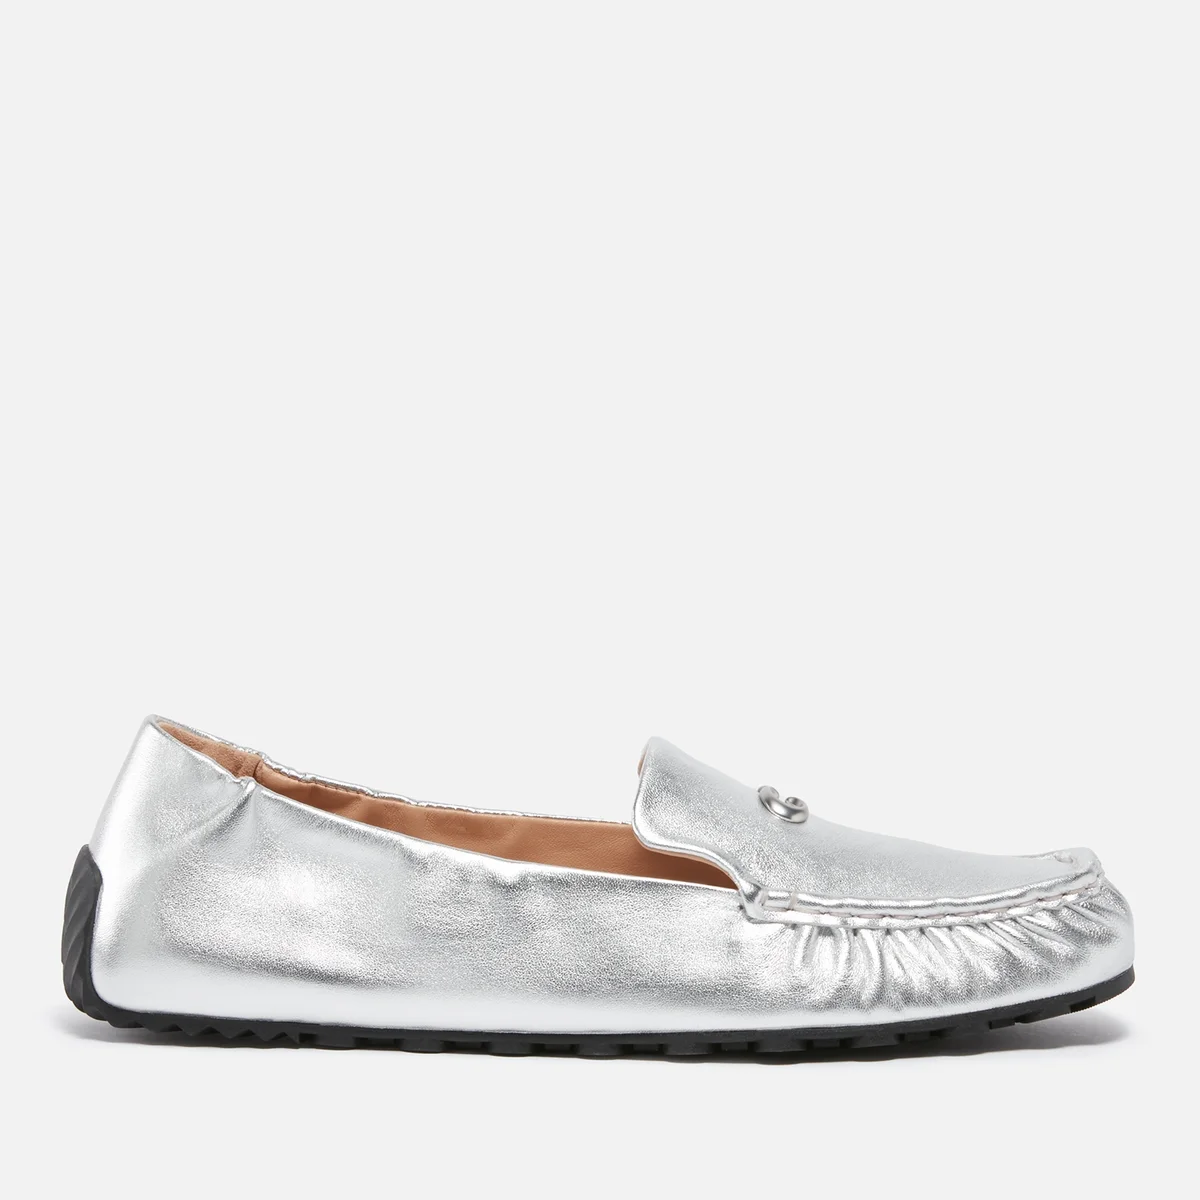 Coach Women's Ronnie Leather Loafers Image 1